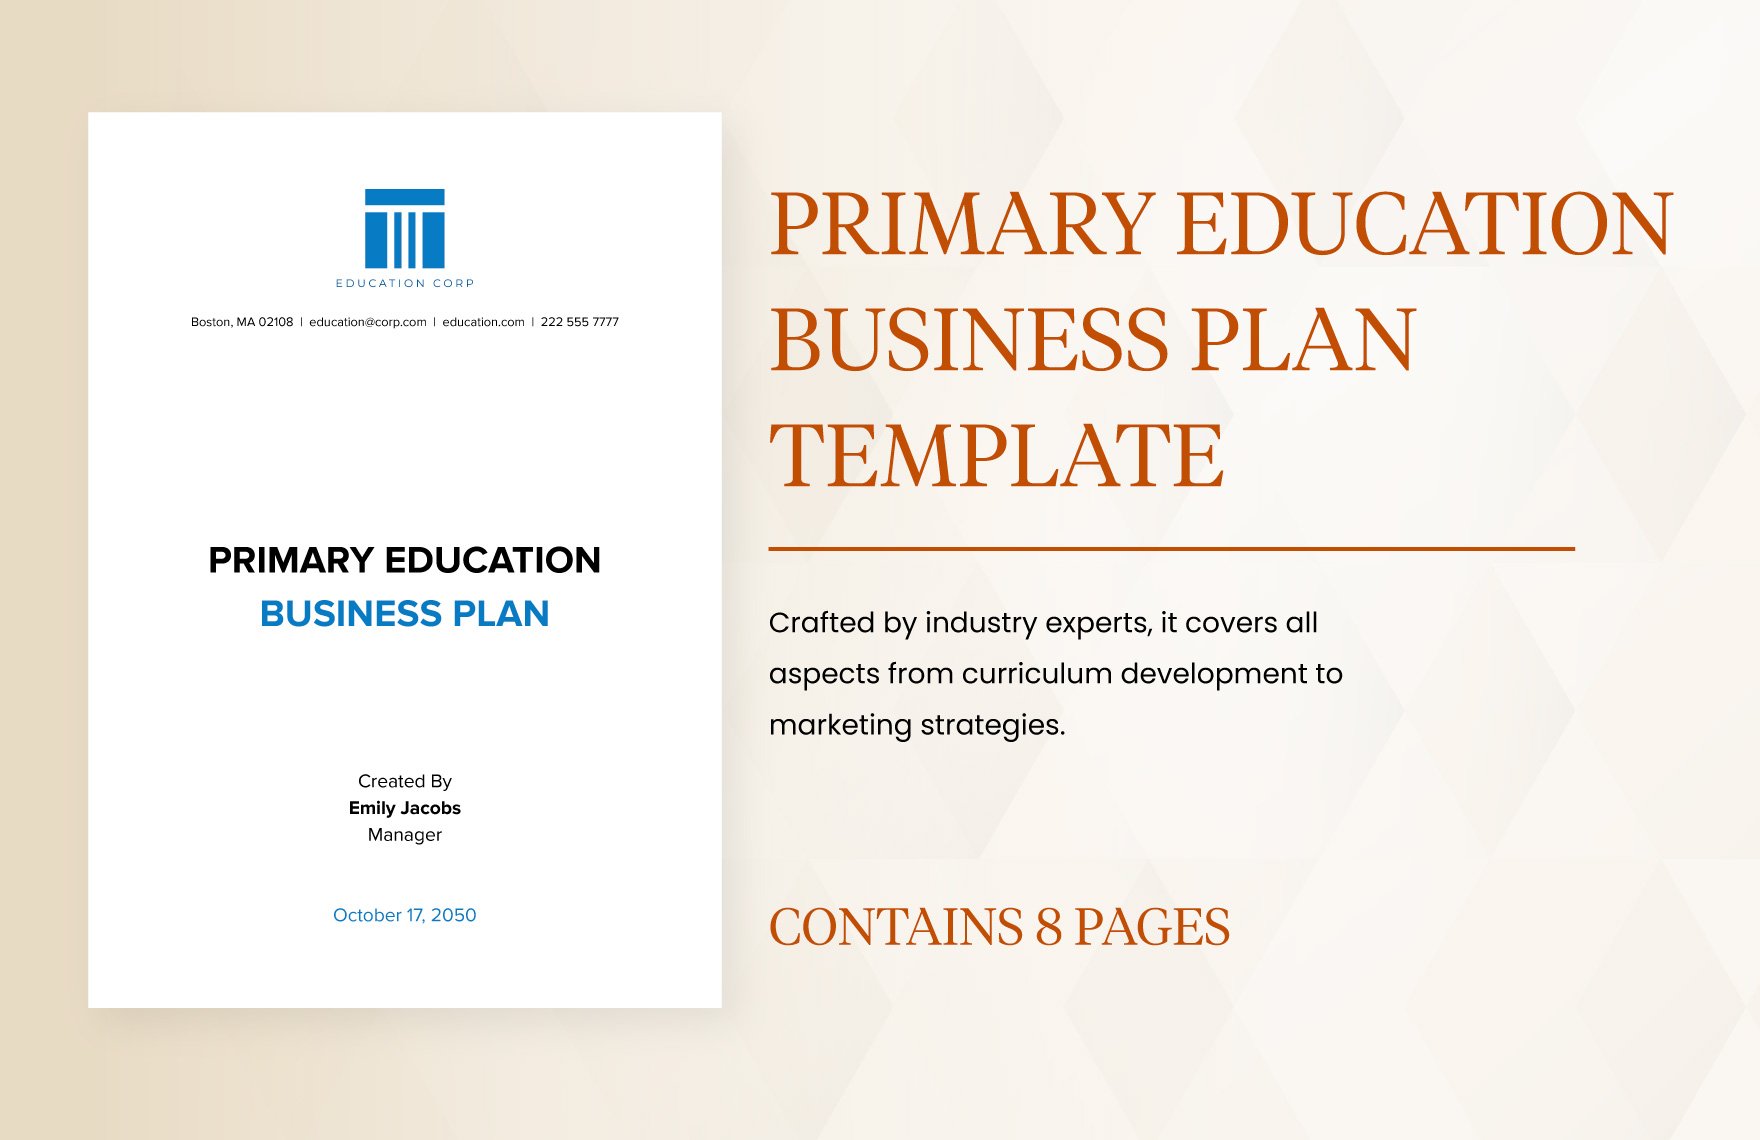 Primary Education Business Plan Template